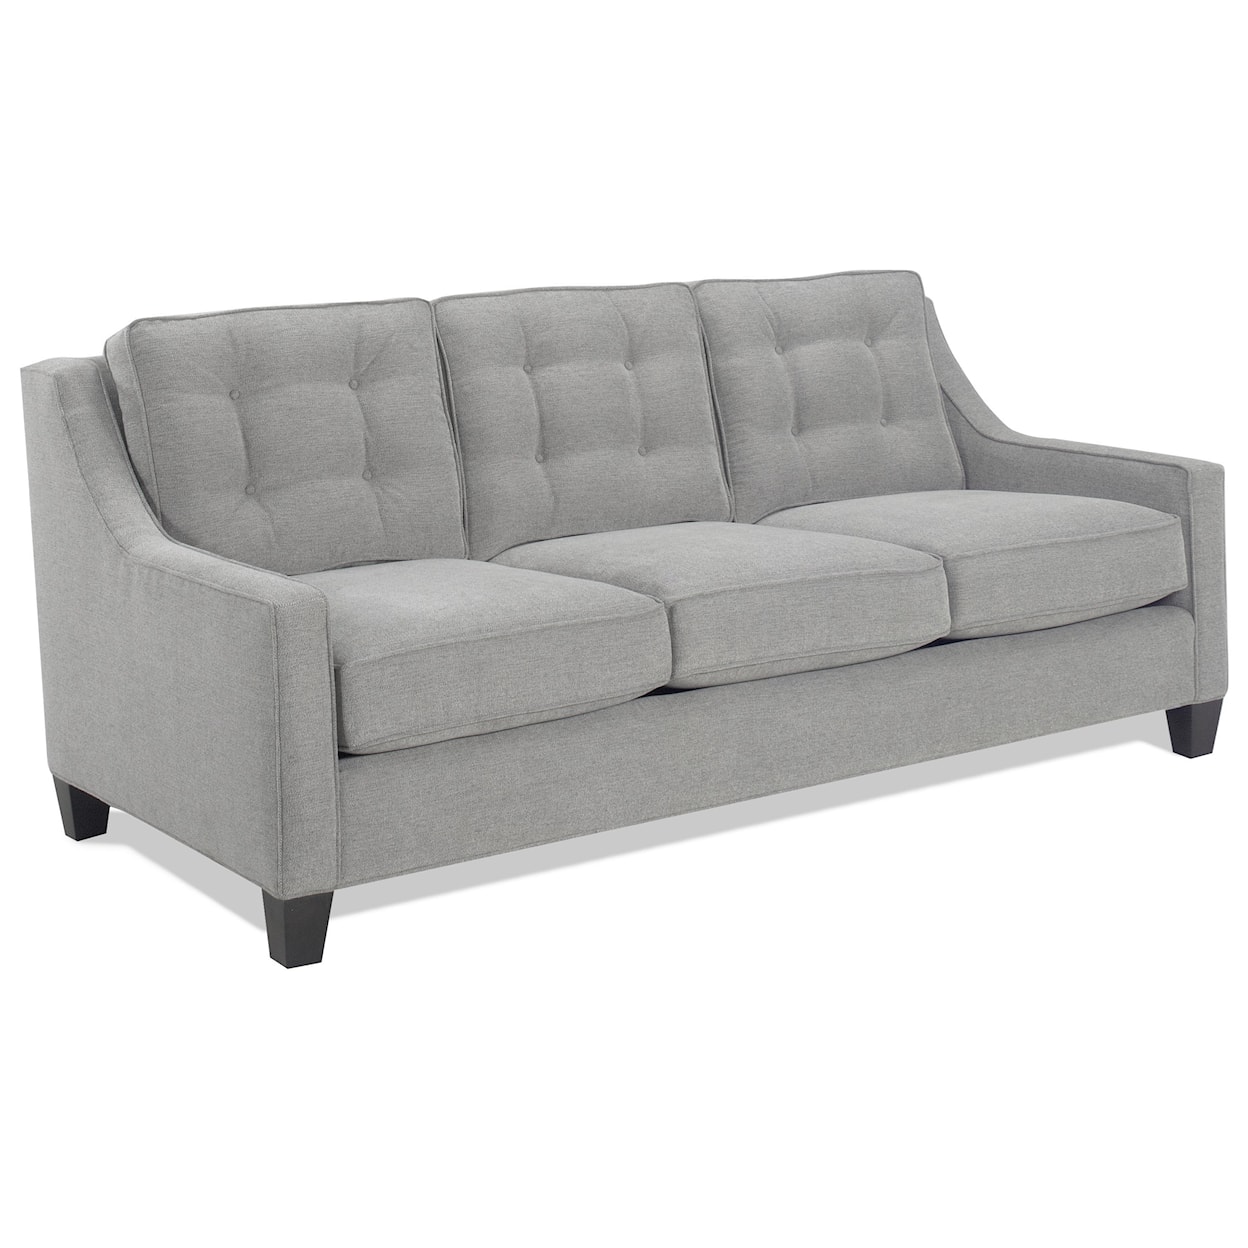 Temple Furniture Brody 5200-81 Contemporary Sofa with Tufted Back and ...